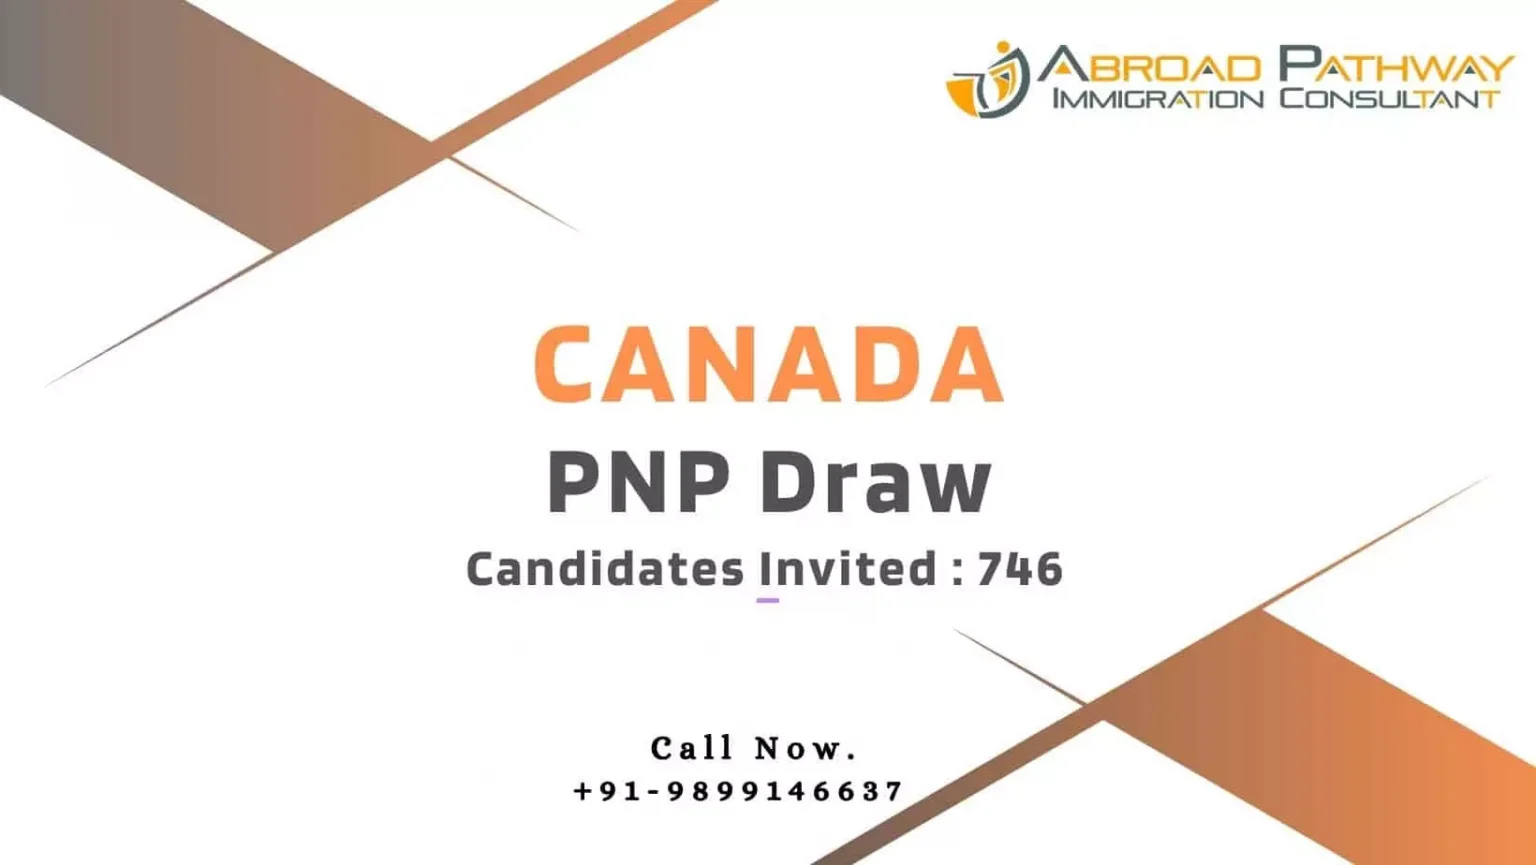 Canada invites 746 Immigration Candidates under Express Entry PNP